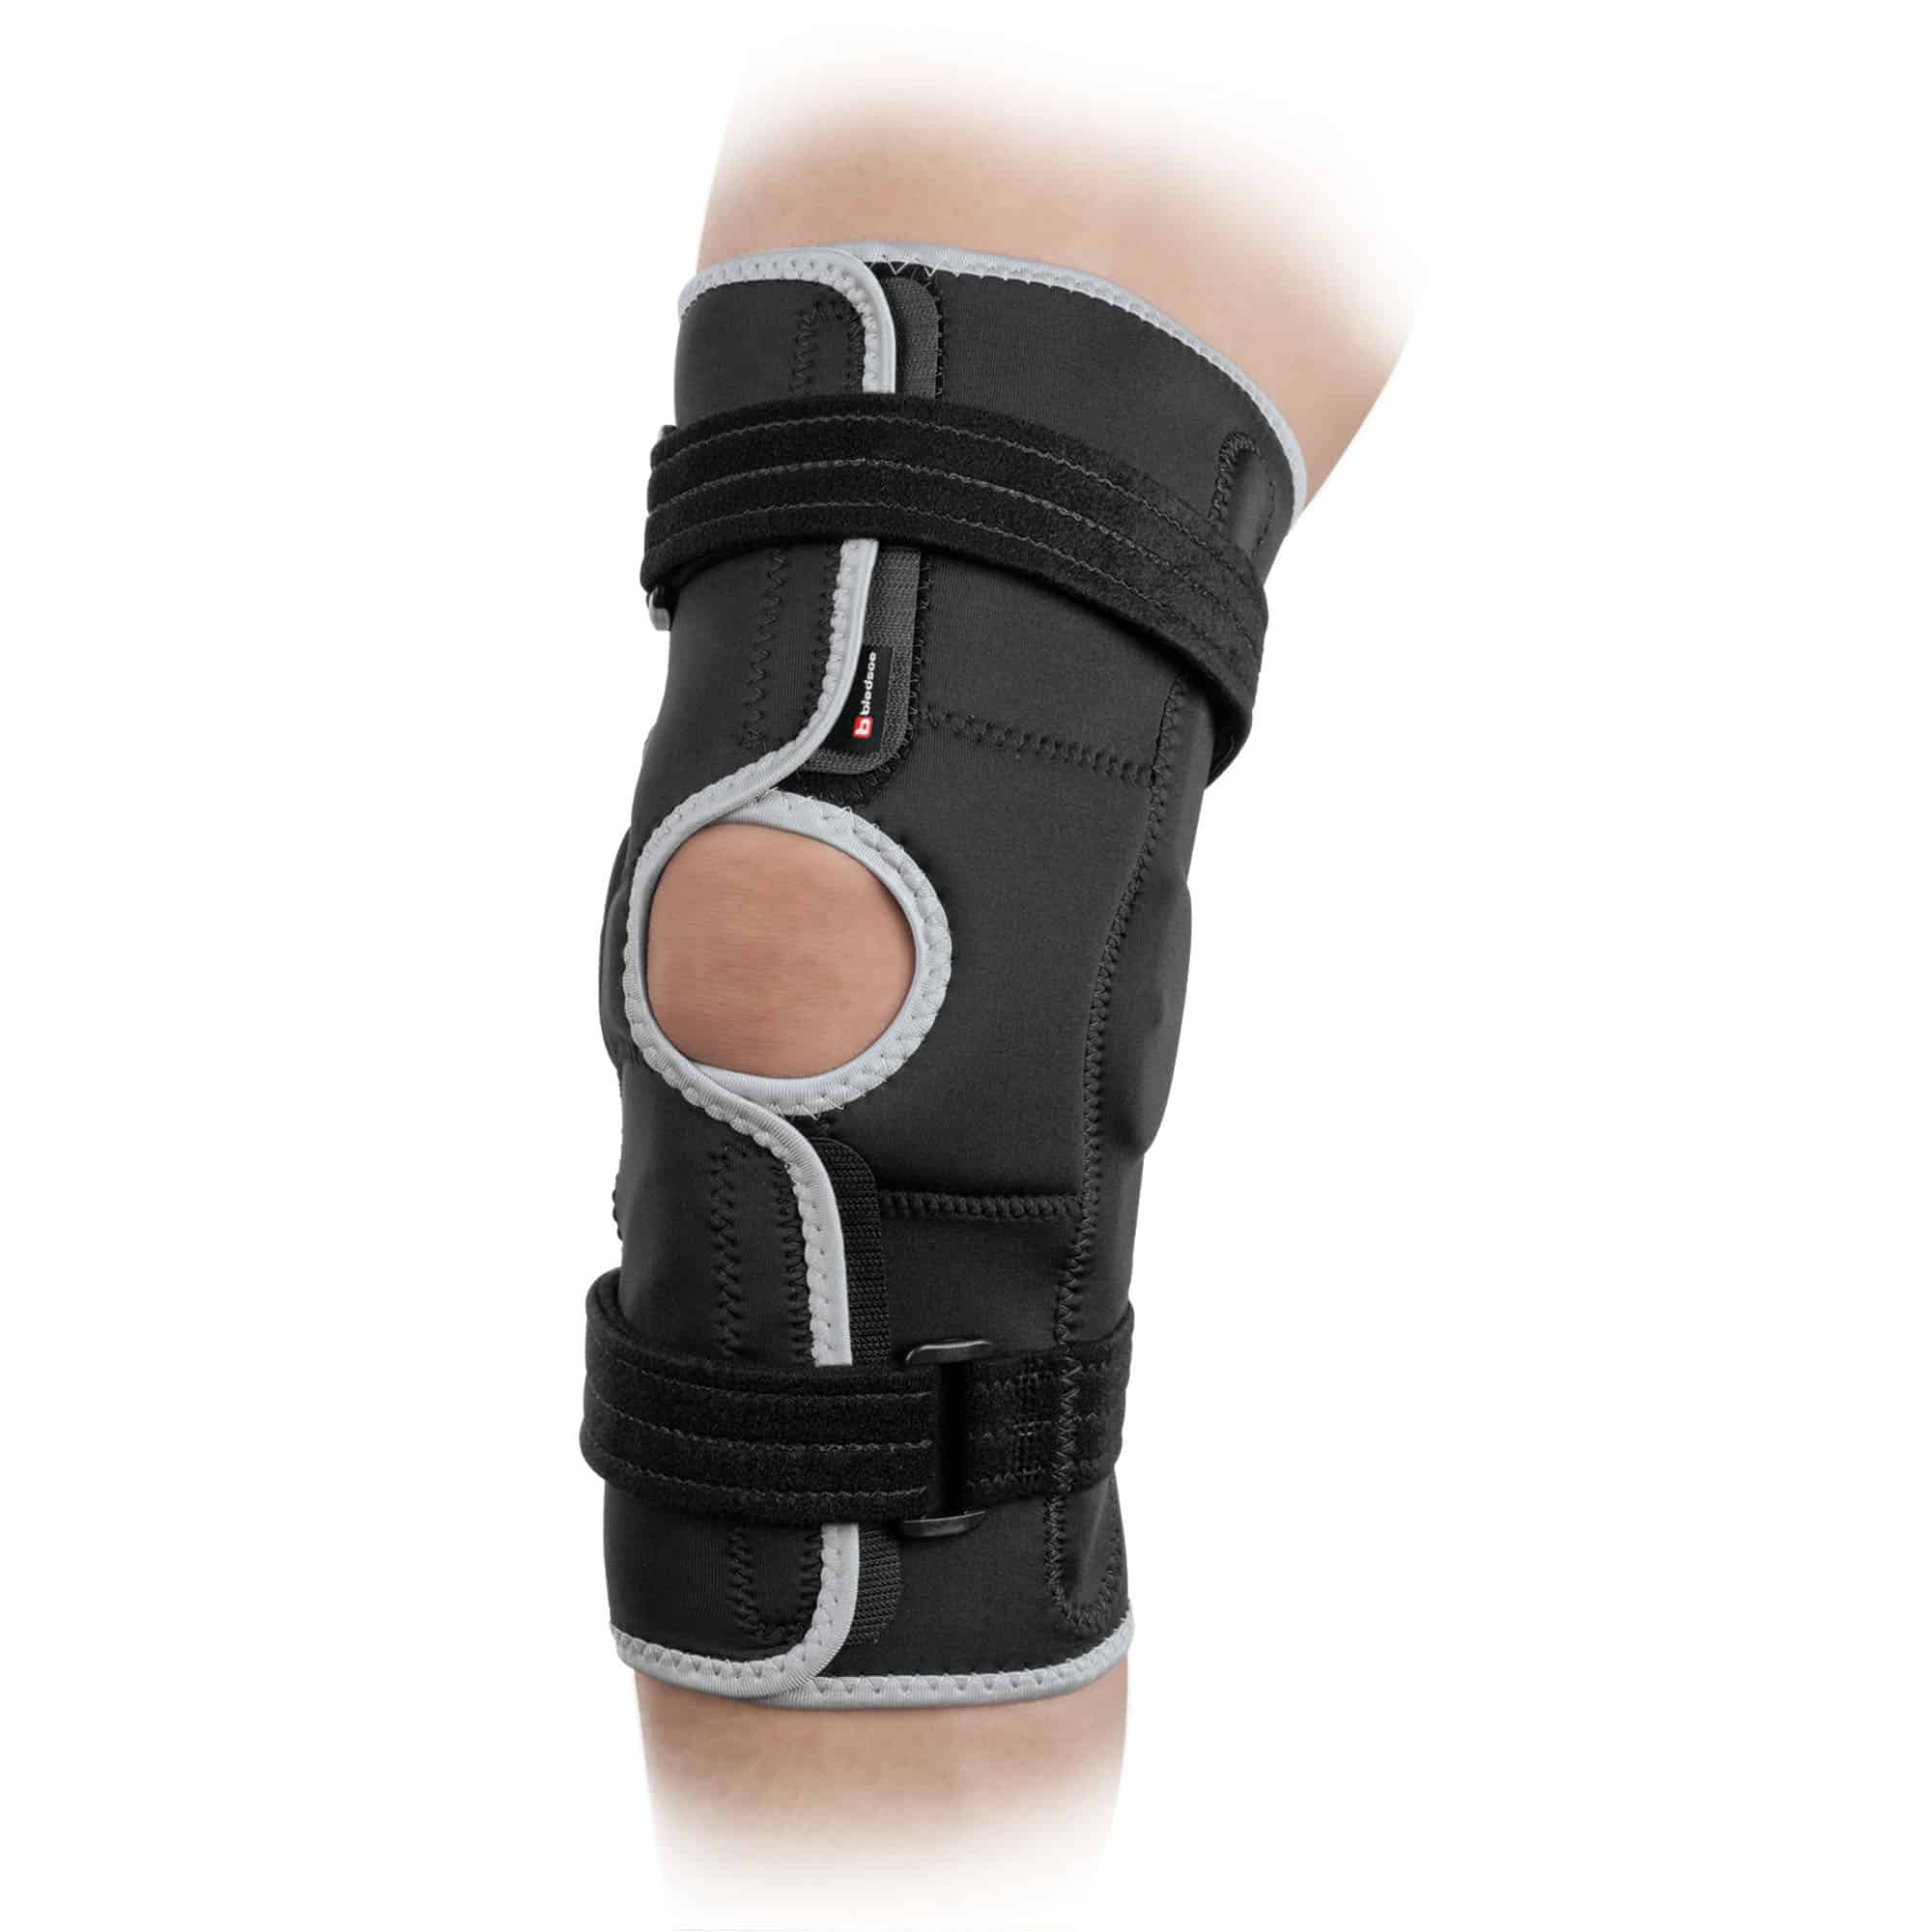 Paediatric Hinged Neoprene Knee Support - 2 sizes available